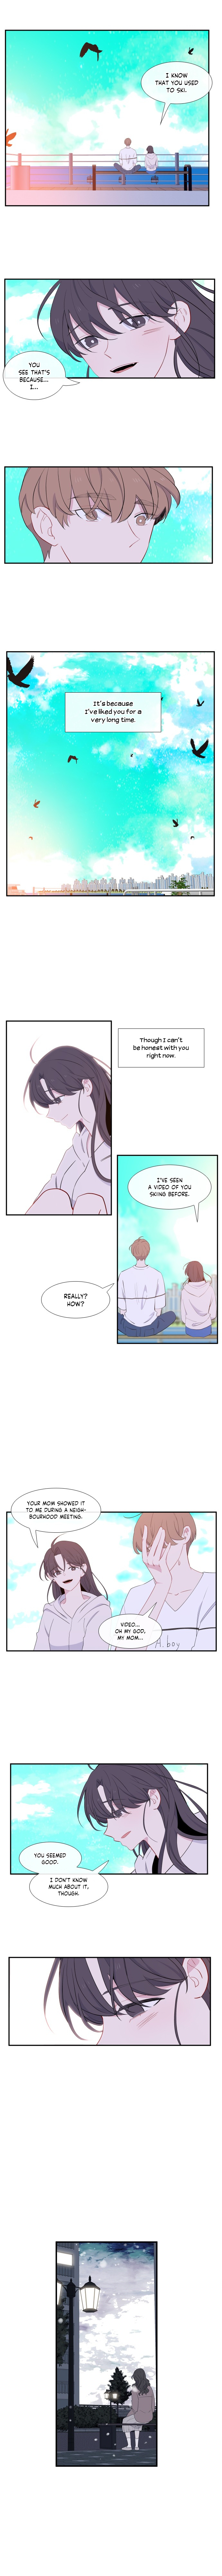 Just A Girl He Knows - Page 2